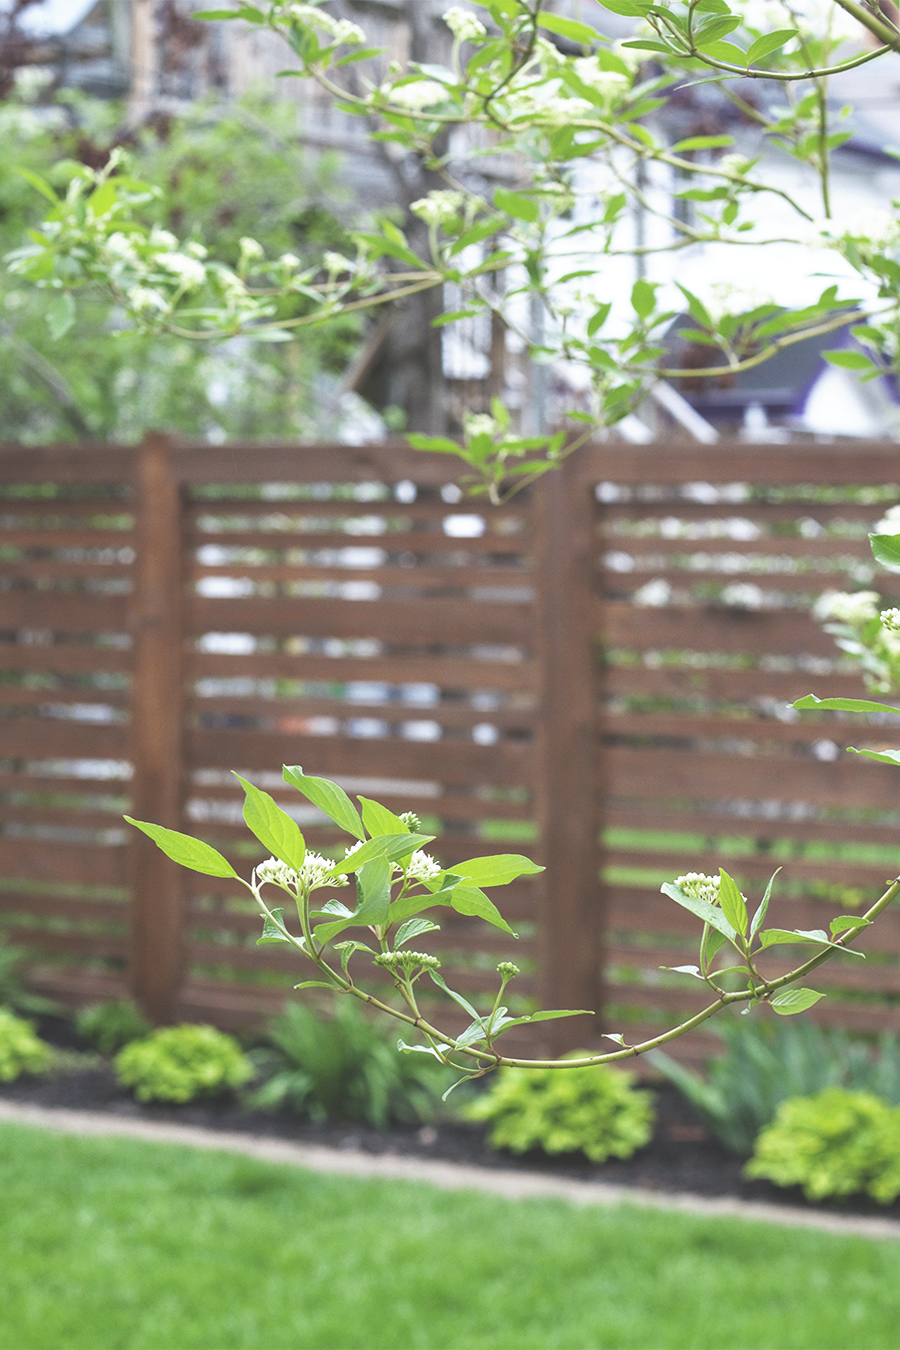 Horizontal Fence Stained Dark Brown